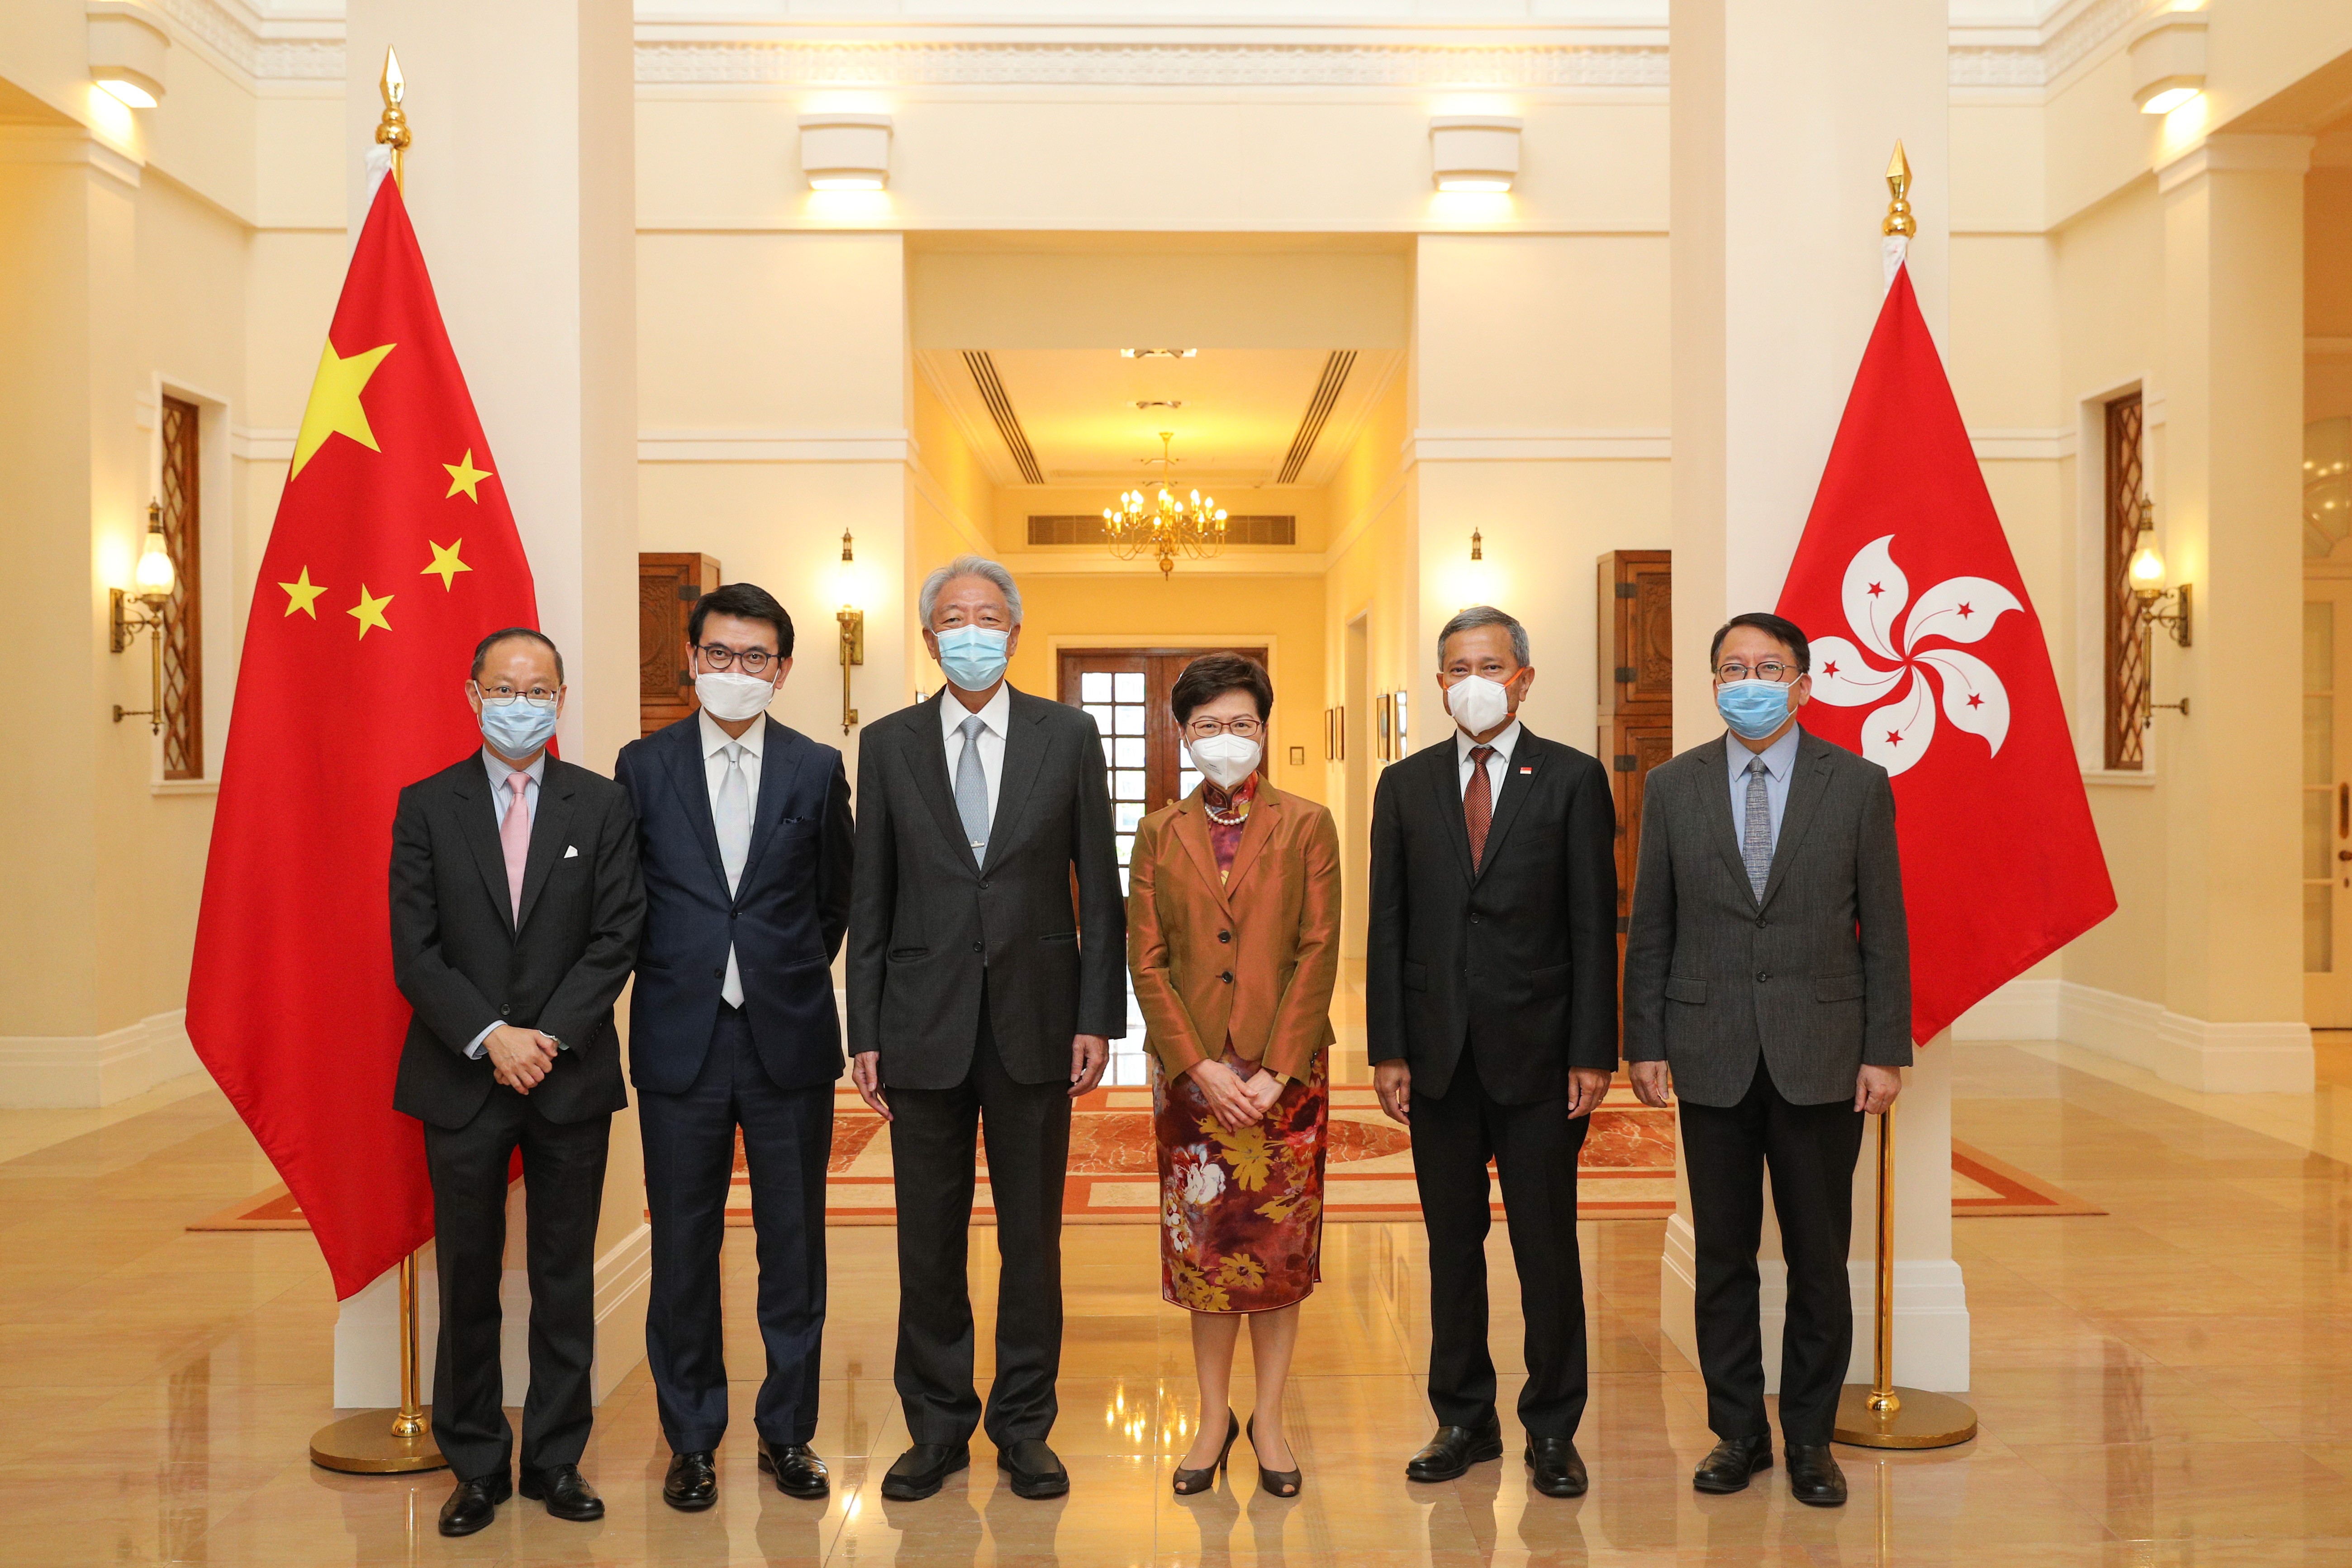 (From left to right) Singapore Consul General in Hong Kong Ong Siew Gay, Secretary for Commerce and Economic Development Edward Yau, Senior Minister and Coordinating Minister for National Security Teo Chee Hean, Chief Executive Carrie Lam, Minister for Foreign Affairs Dr Vivian Balakrishnan, and Director of the Chief Executive’s Office Eric Chan